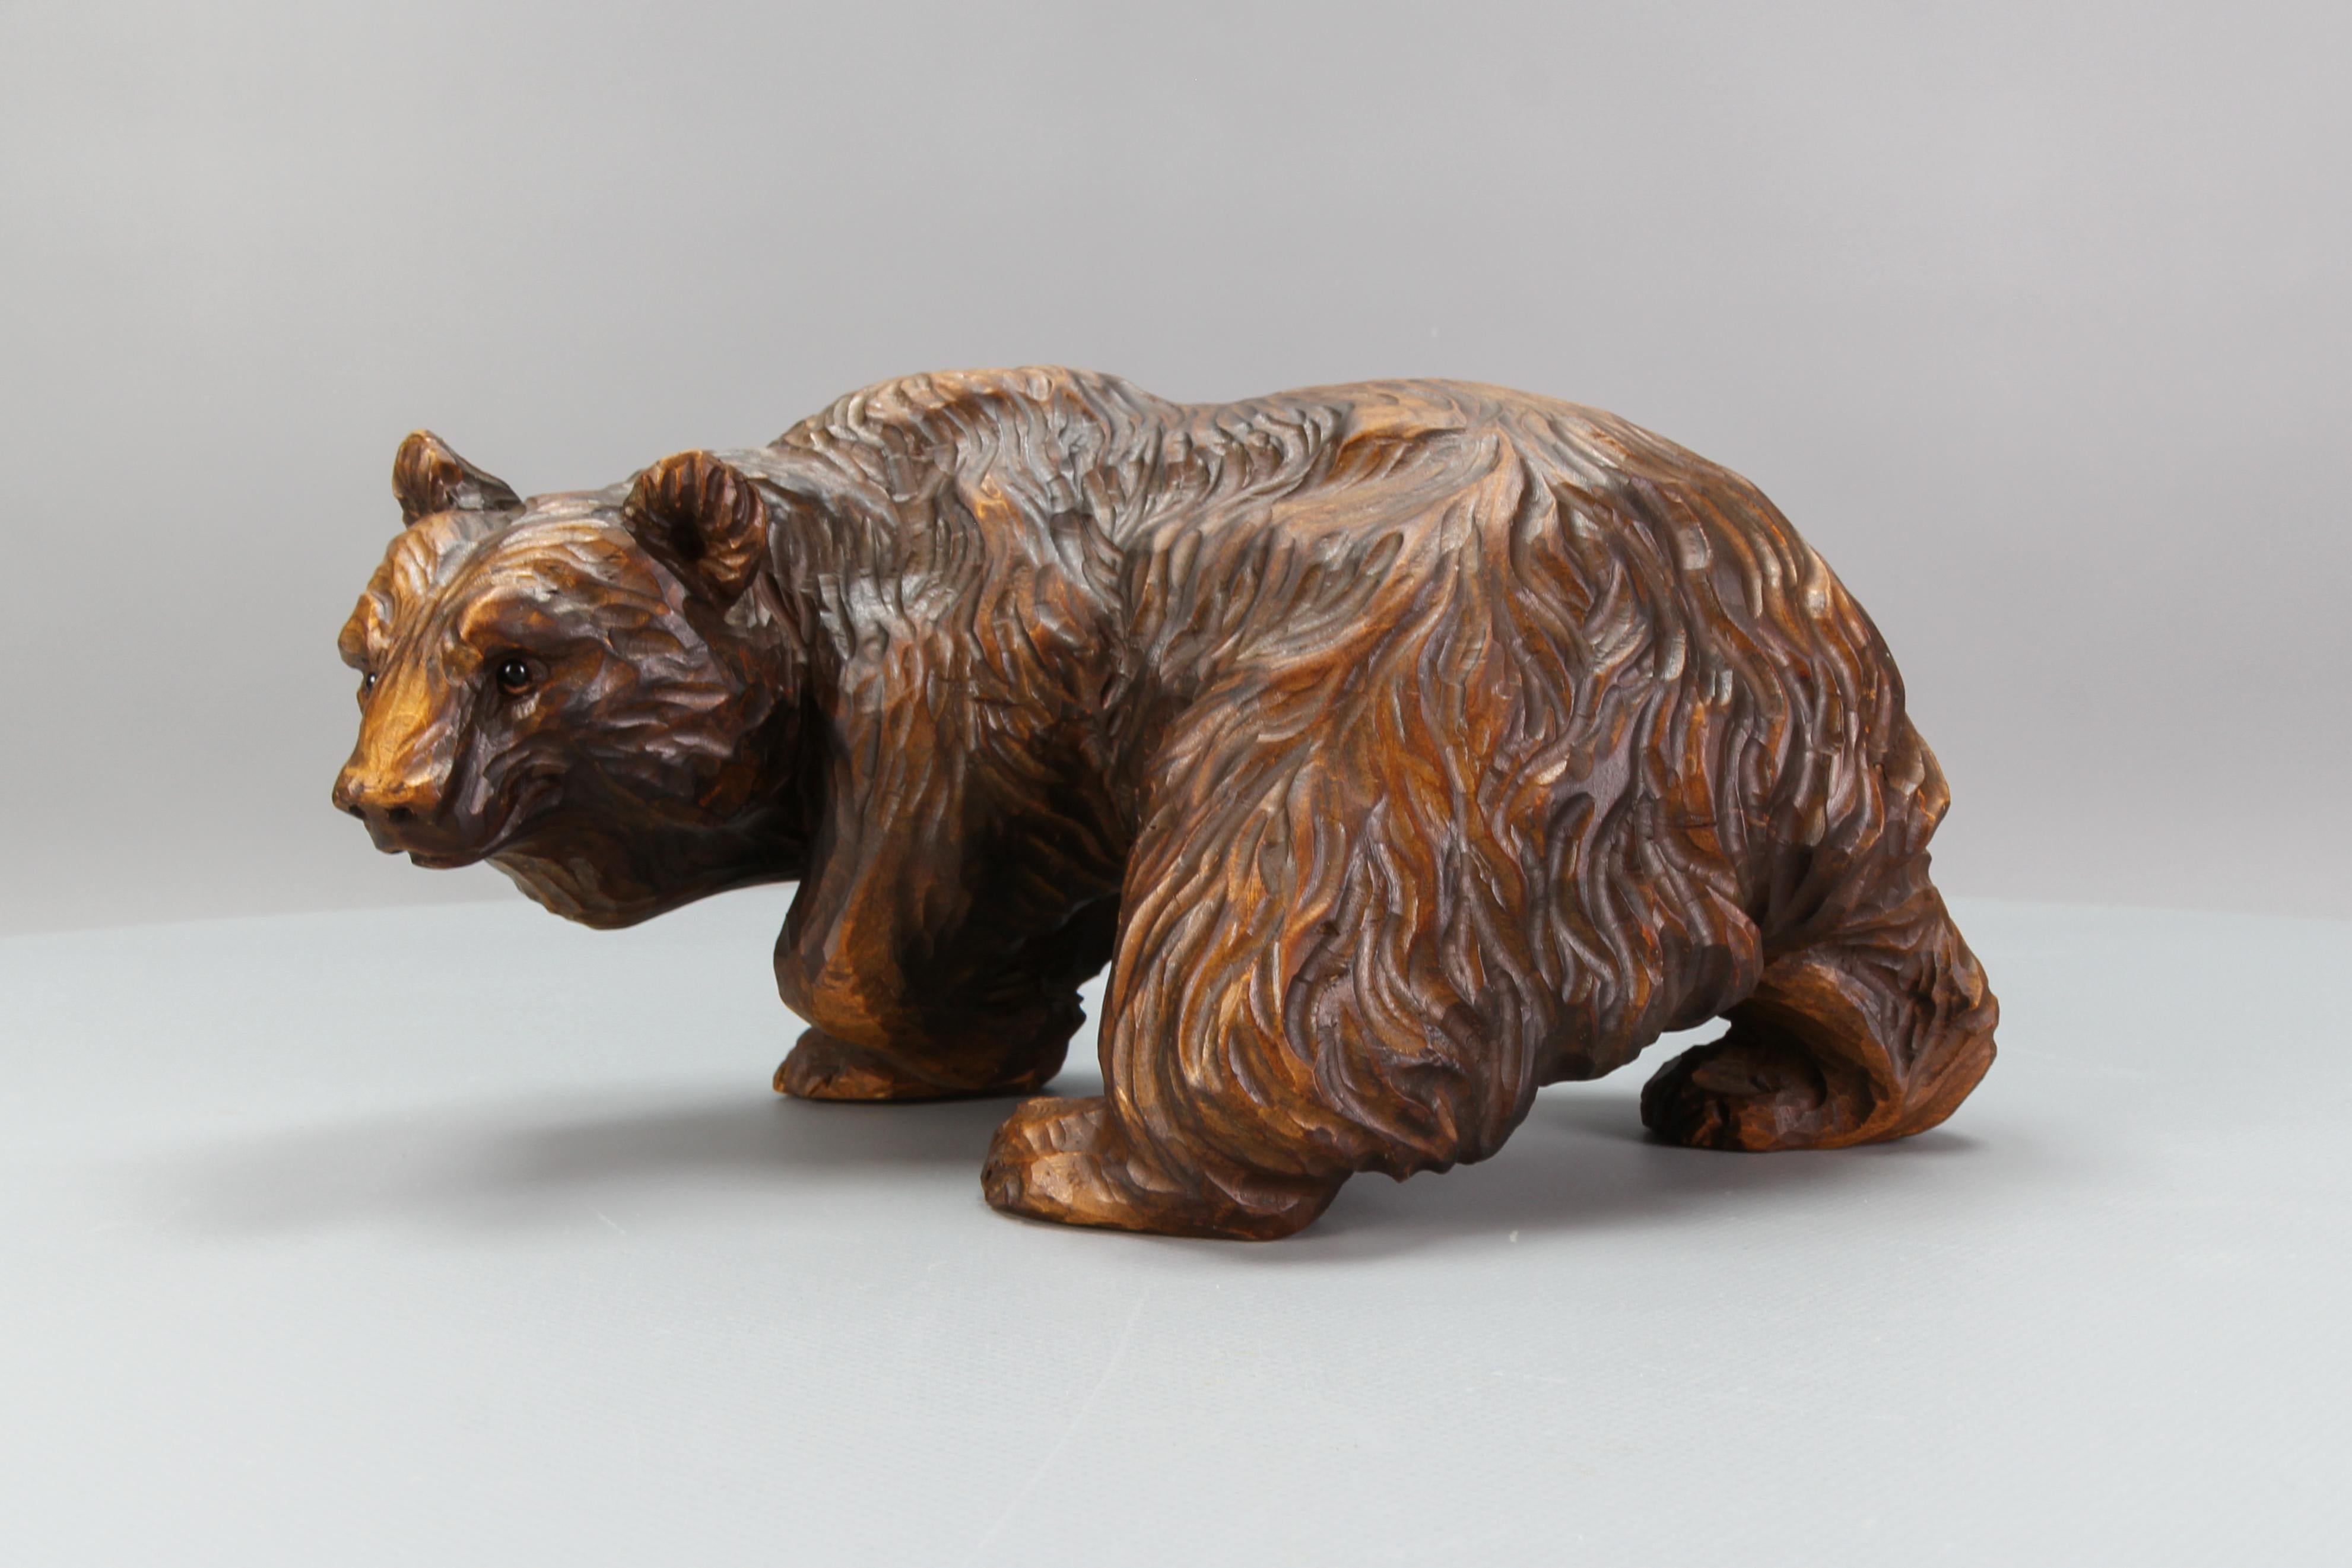 Hand carved bear sculpture with glass eyes, Germany, circa the 1930s.
A beautiful and masterfully hand-carved linden-wood figure of a bear, with glass eyes, highly detailed features, and fur. Germany, circa 1930.
Dimensions, approx.: height: 14 cm